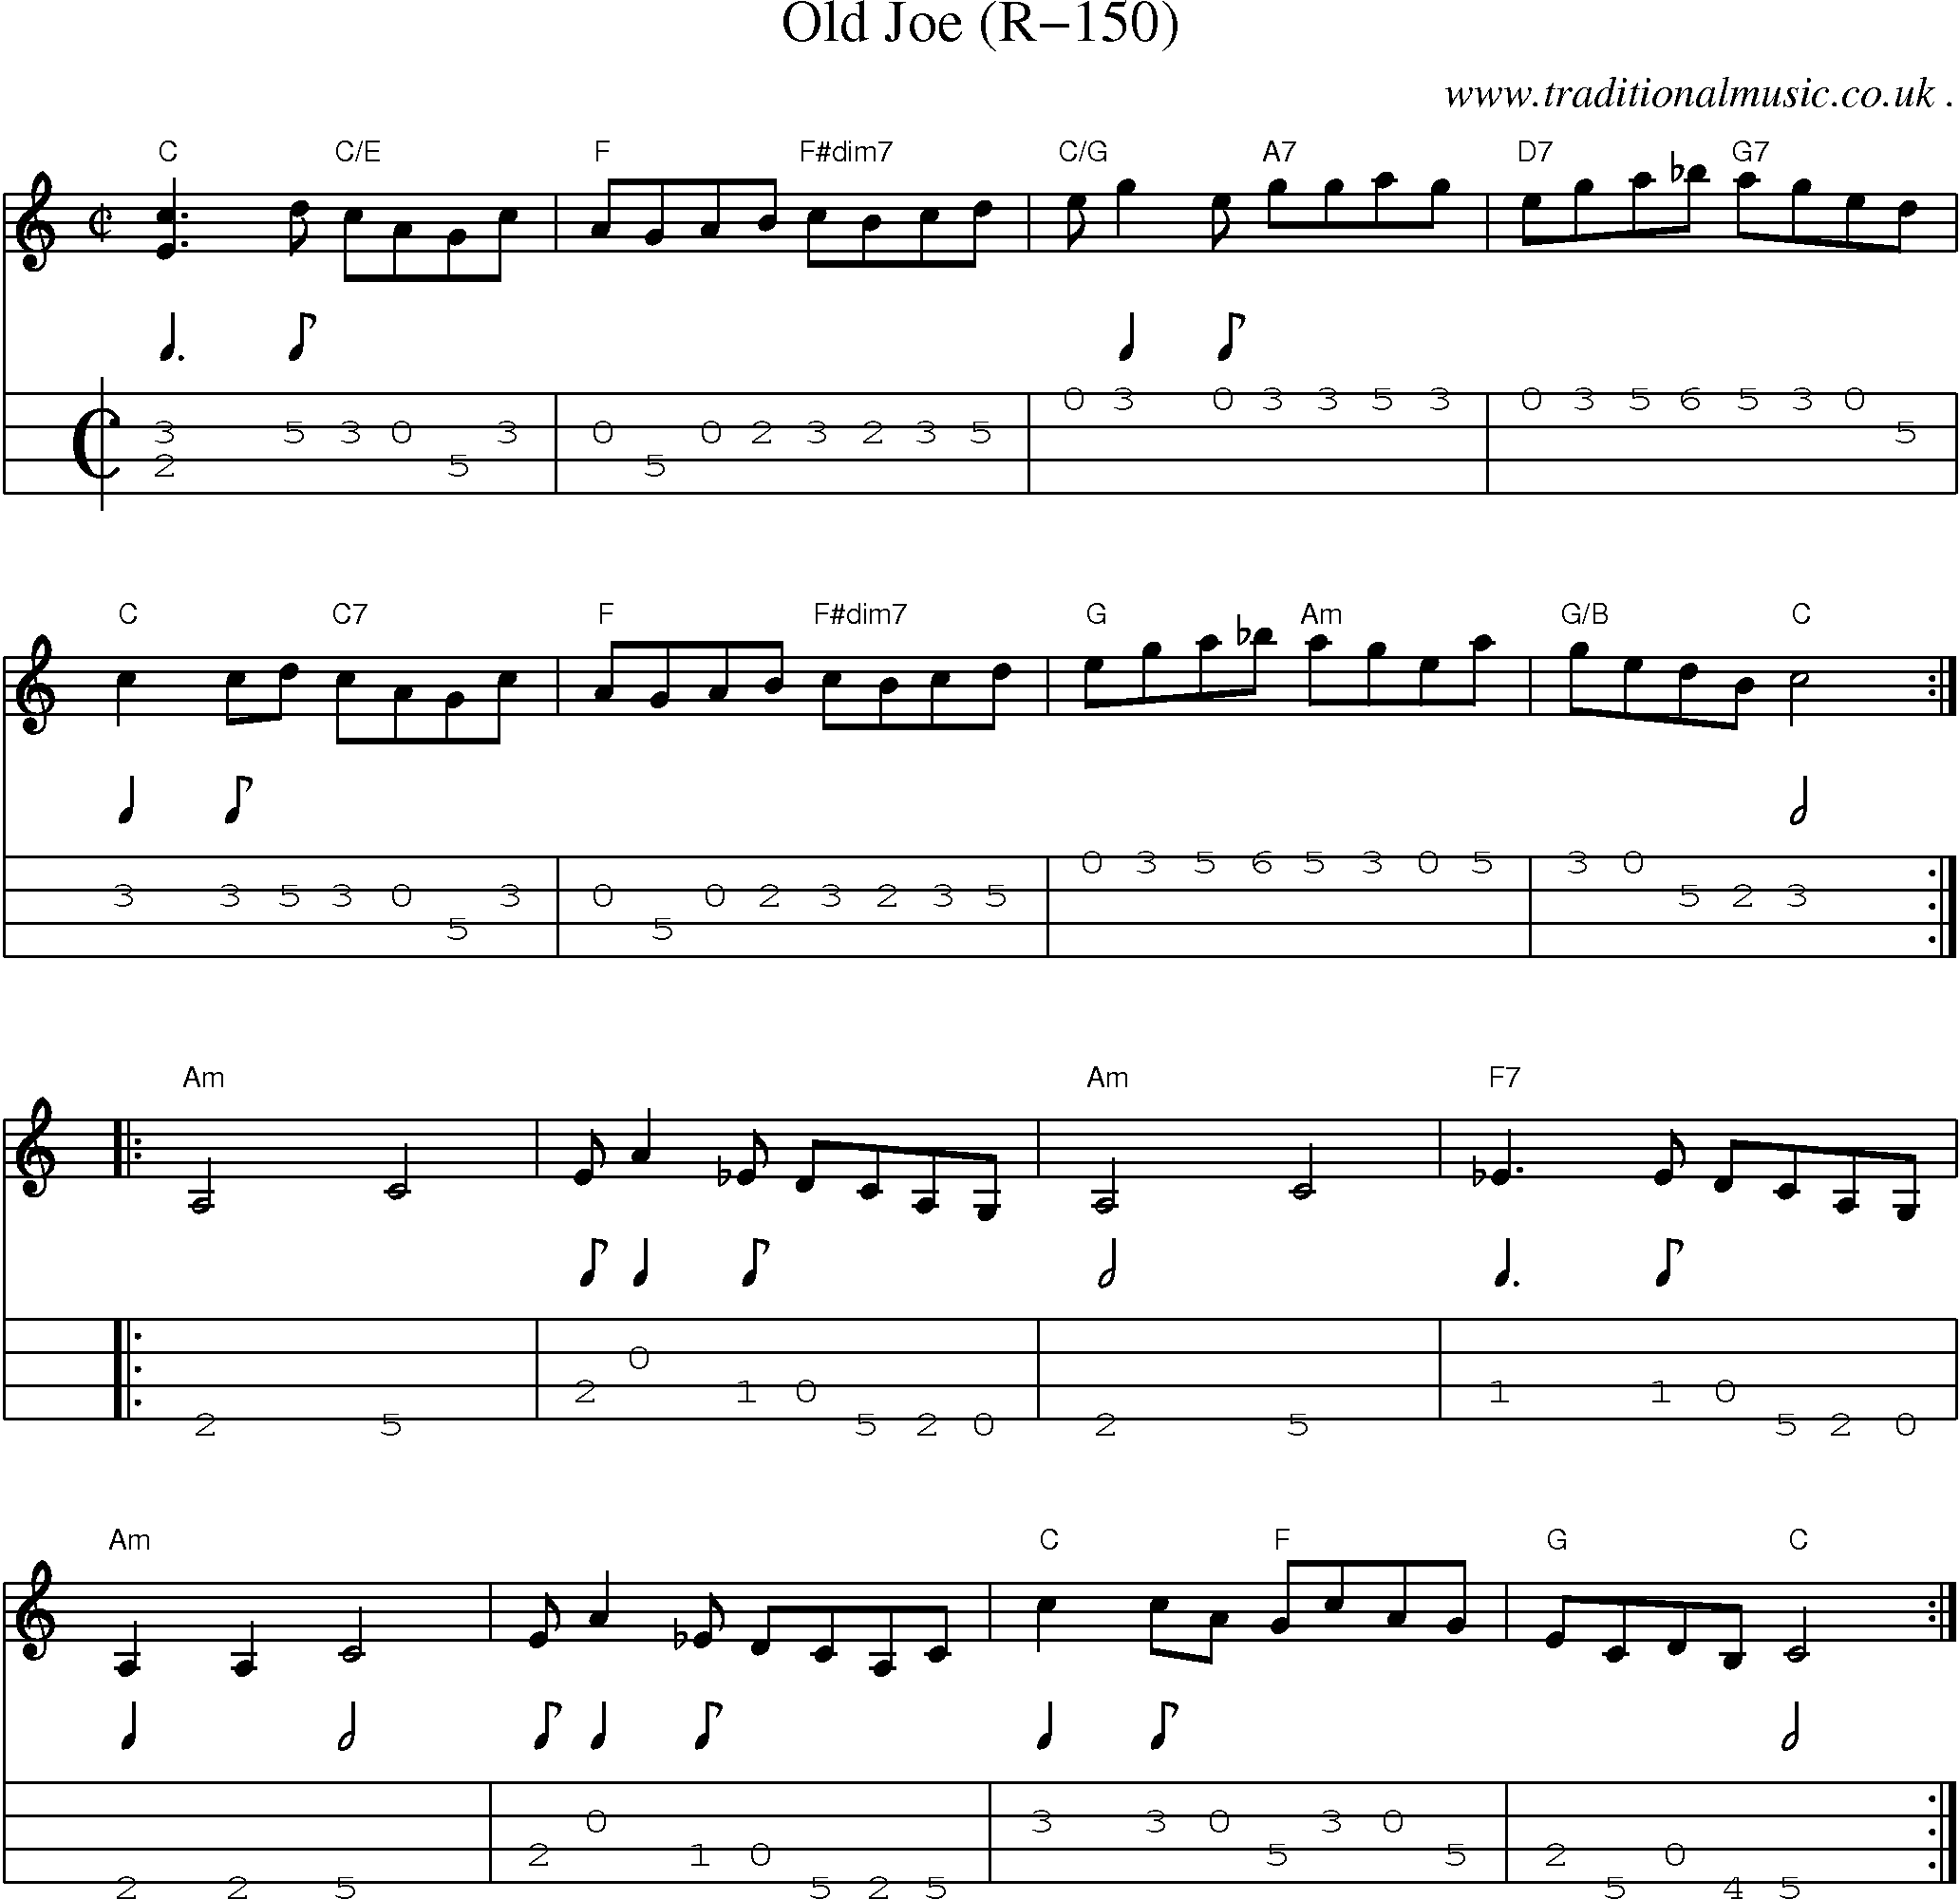 Music Score and Guitar Tabs for Old Joe (r-150)